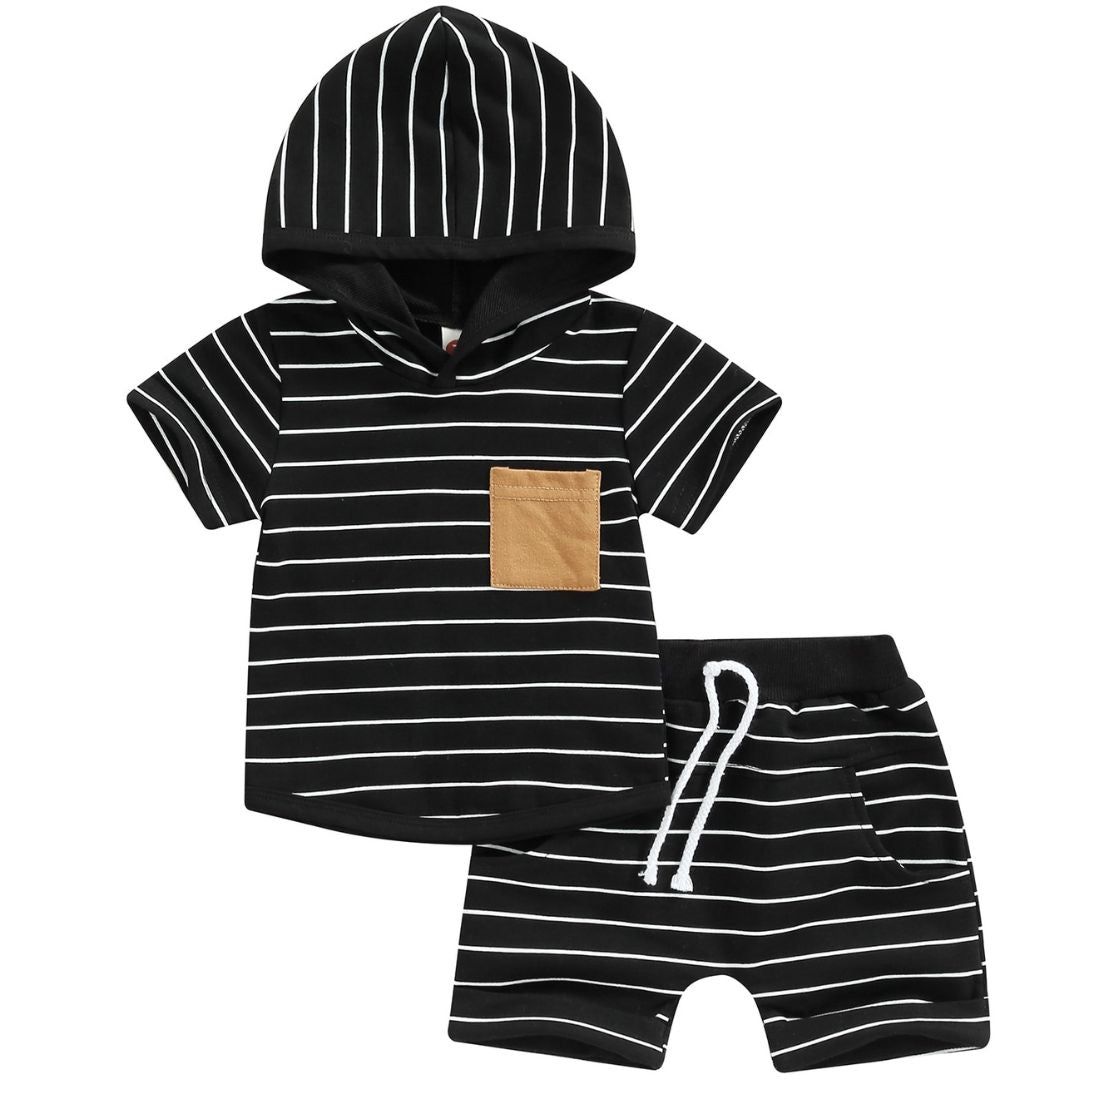 Toddler Boy Black Stripes Hoodie Pocket 2-Piece Clothing Set - My Trendy Youngsters |  Buy on-trend and stylish Baby and Toddler Clothing Sets @ My Trendy Youngsters - Dress your little one in Style @ My Trendy Youngsters 